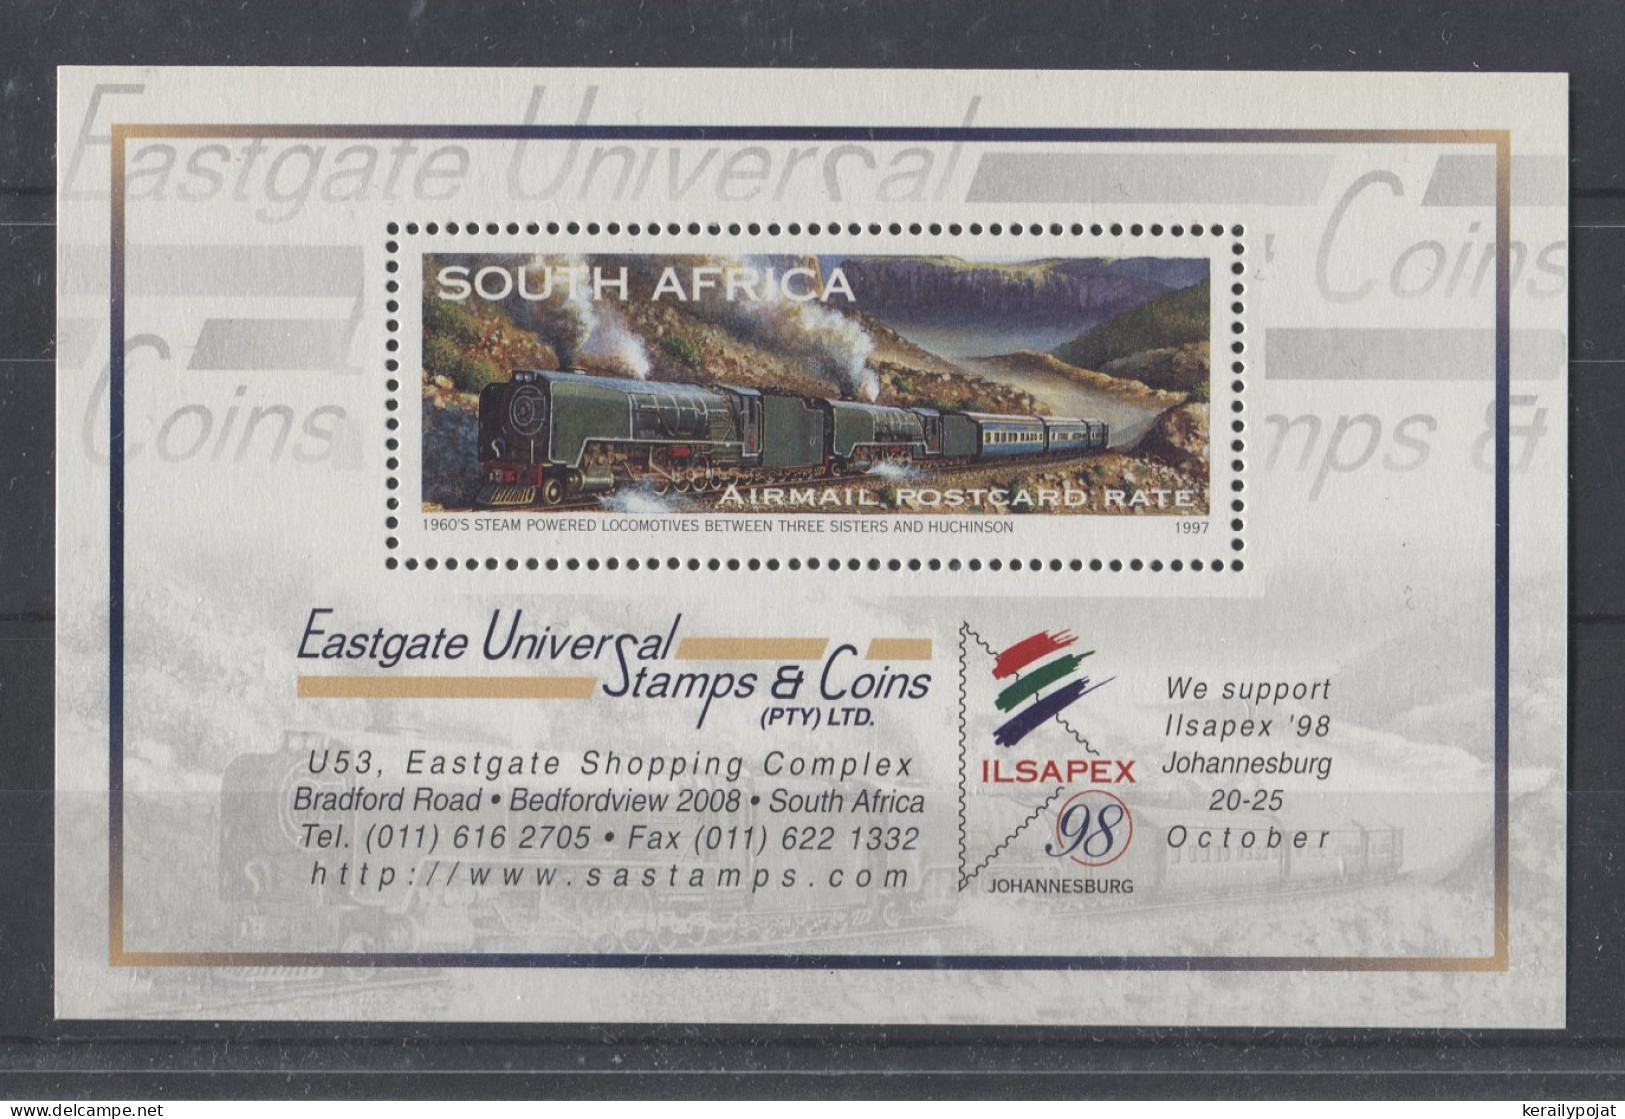 South Africa - 1997 Eastgate Universal Stamps & Coins Block MNH__(TH-11618) - Blocs-feuillets